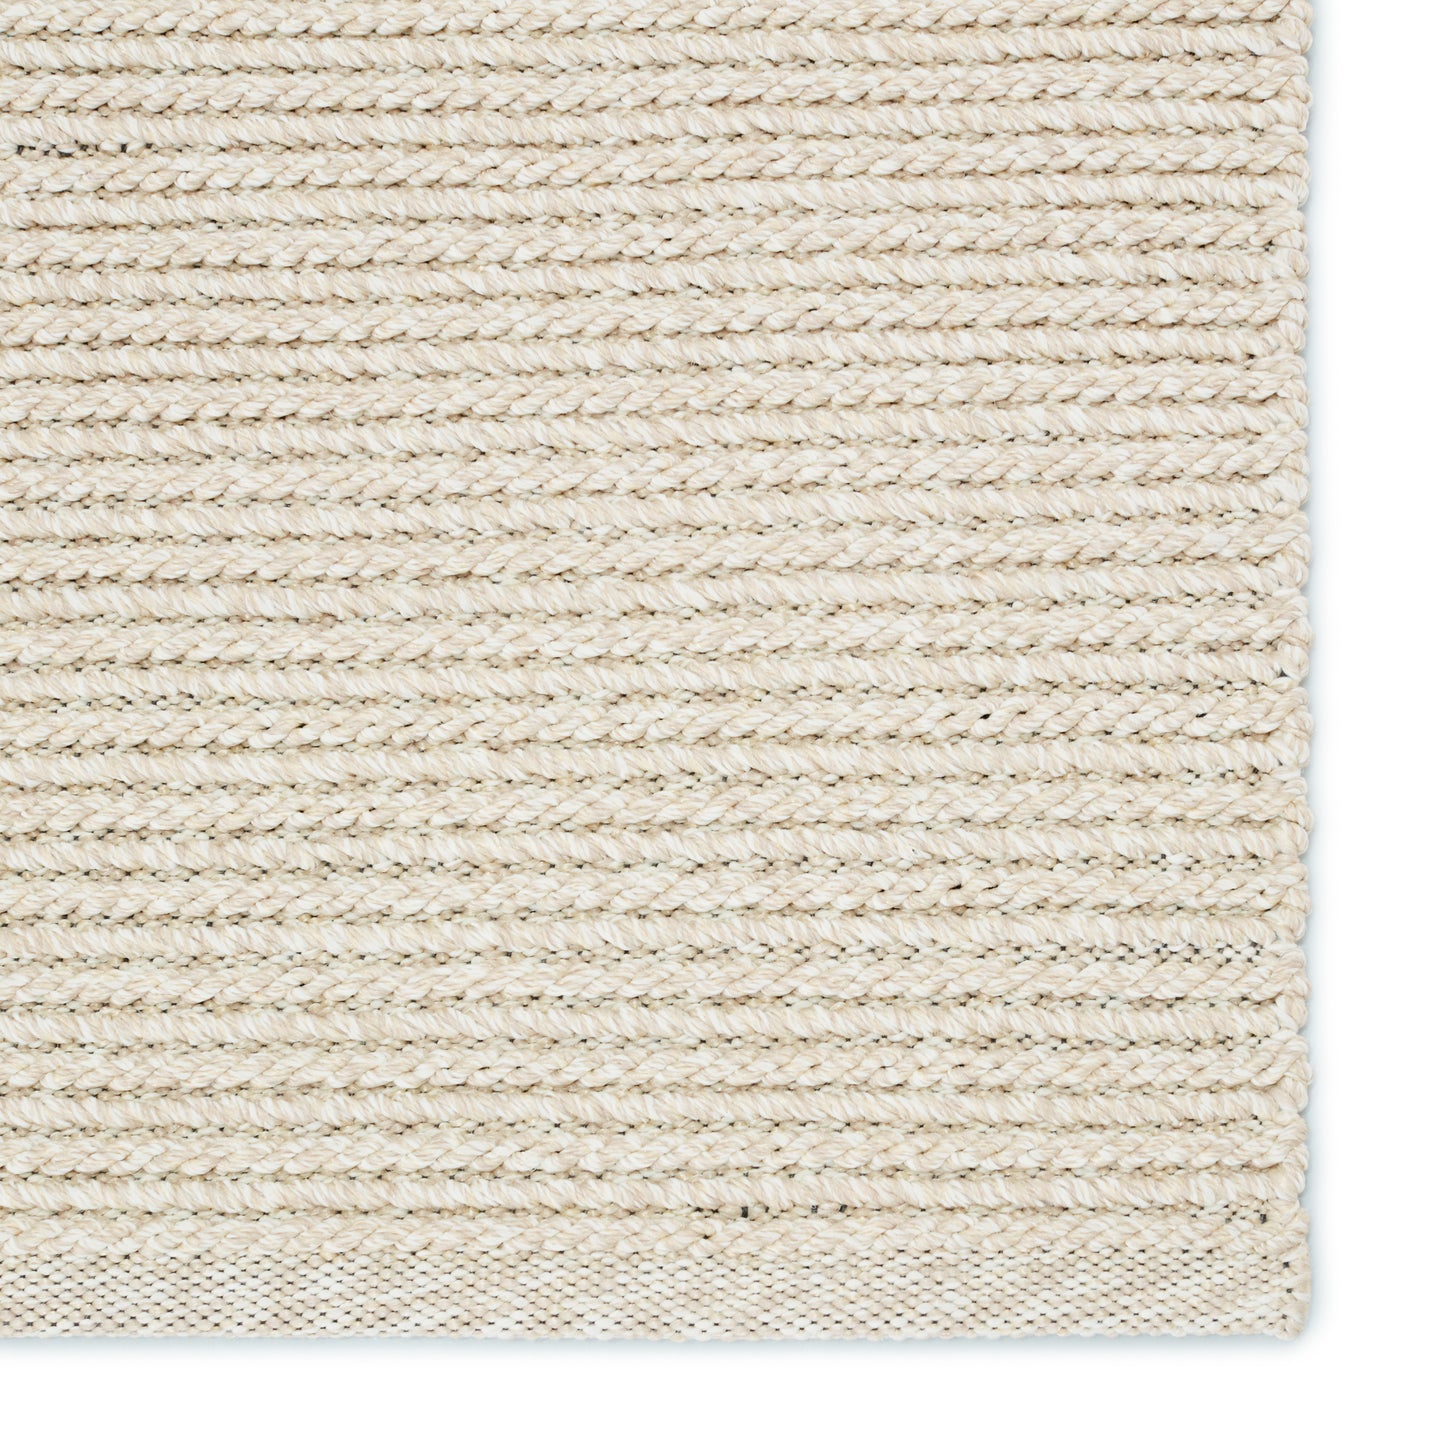 Brayden Raynor Handmade Synthetic Blend Outdoor Area Rug From Jaipur Living